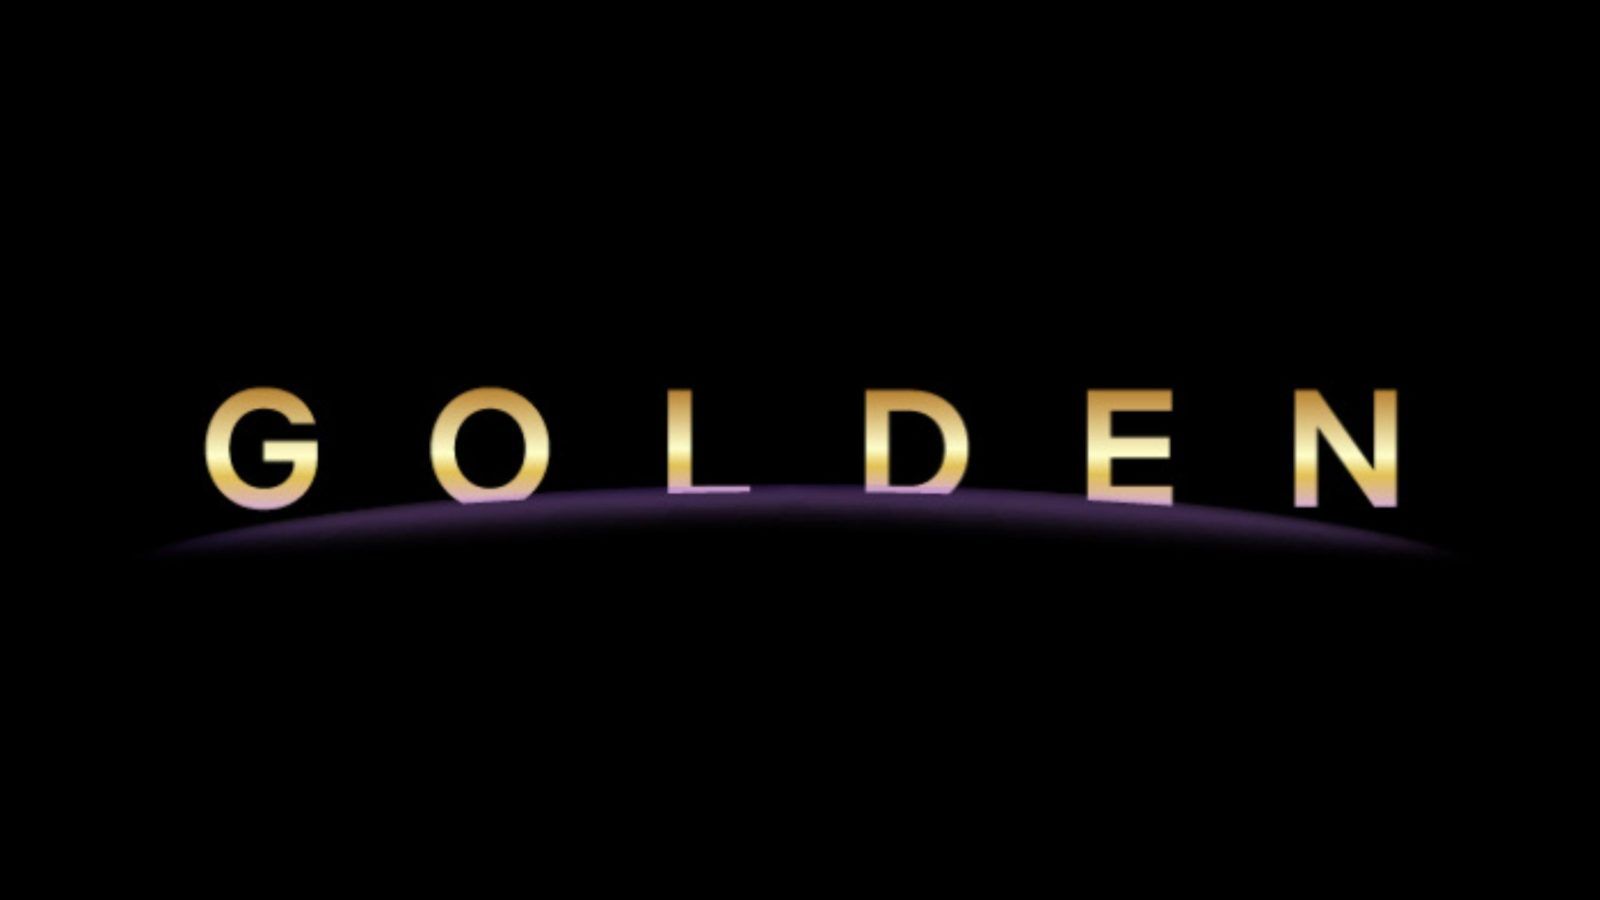 Netflix launches Golden, a new social media channel to celebrate the Asian community